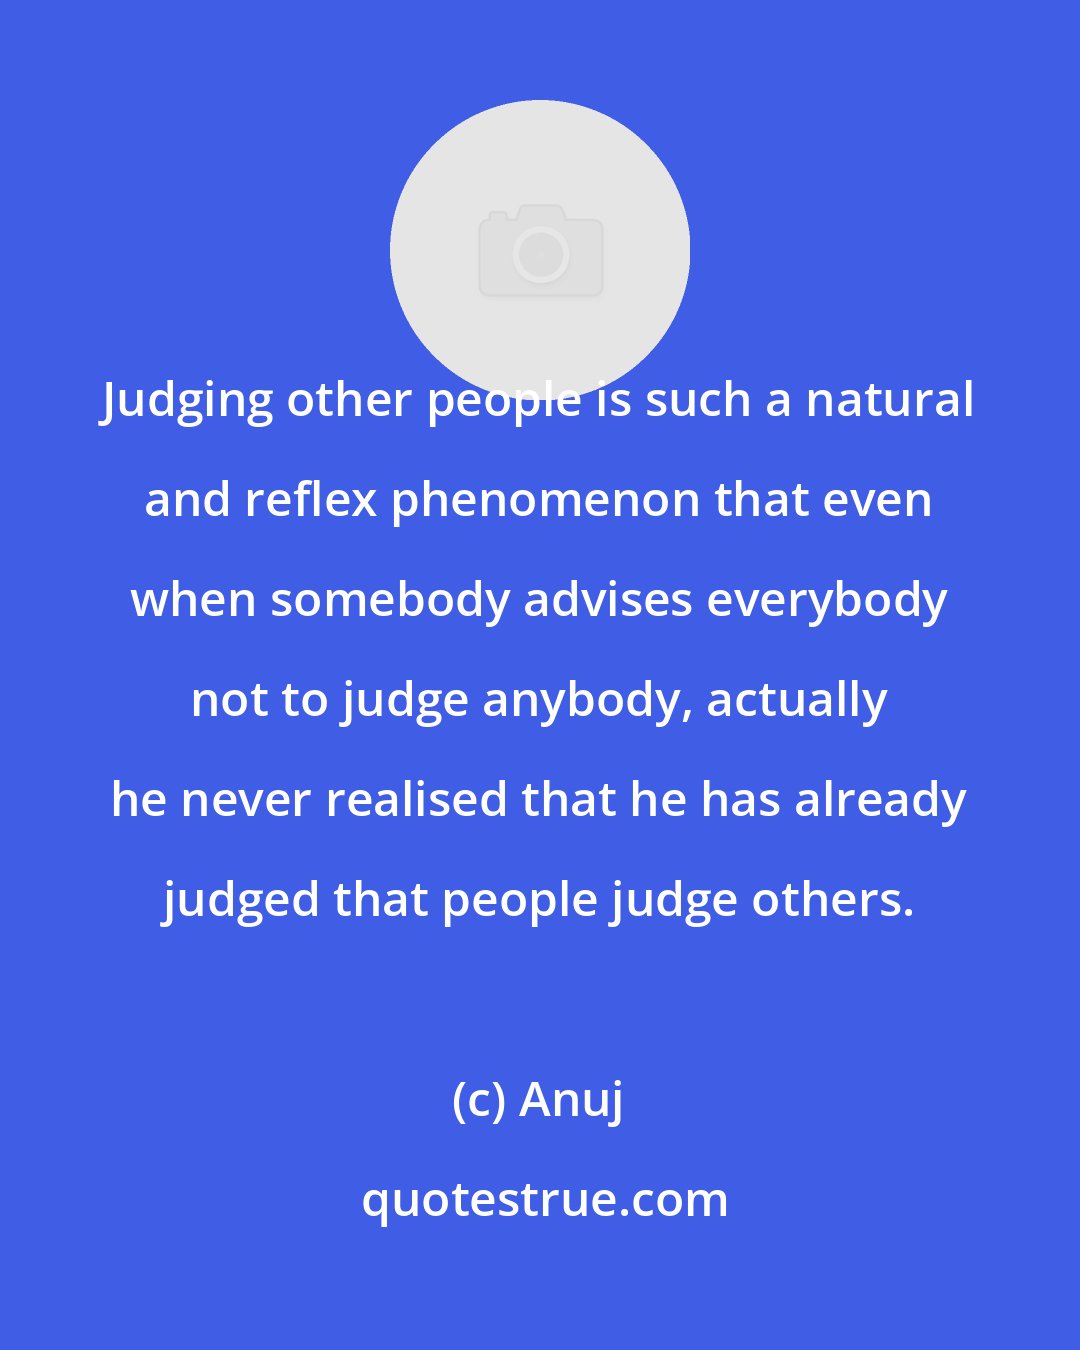 Anuj: Judging other people is such a natural and reflex phenomenon that even when somebody advises everybody not to judge anybody, actually he never realised that he has already judged that people judge others.